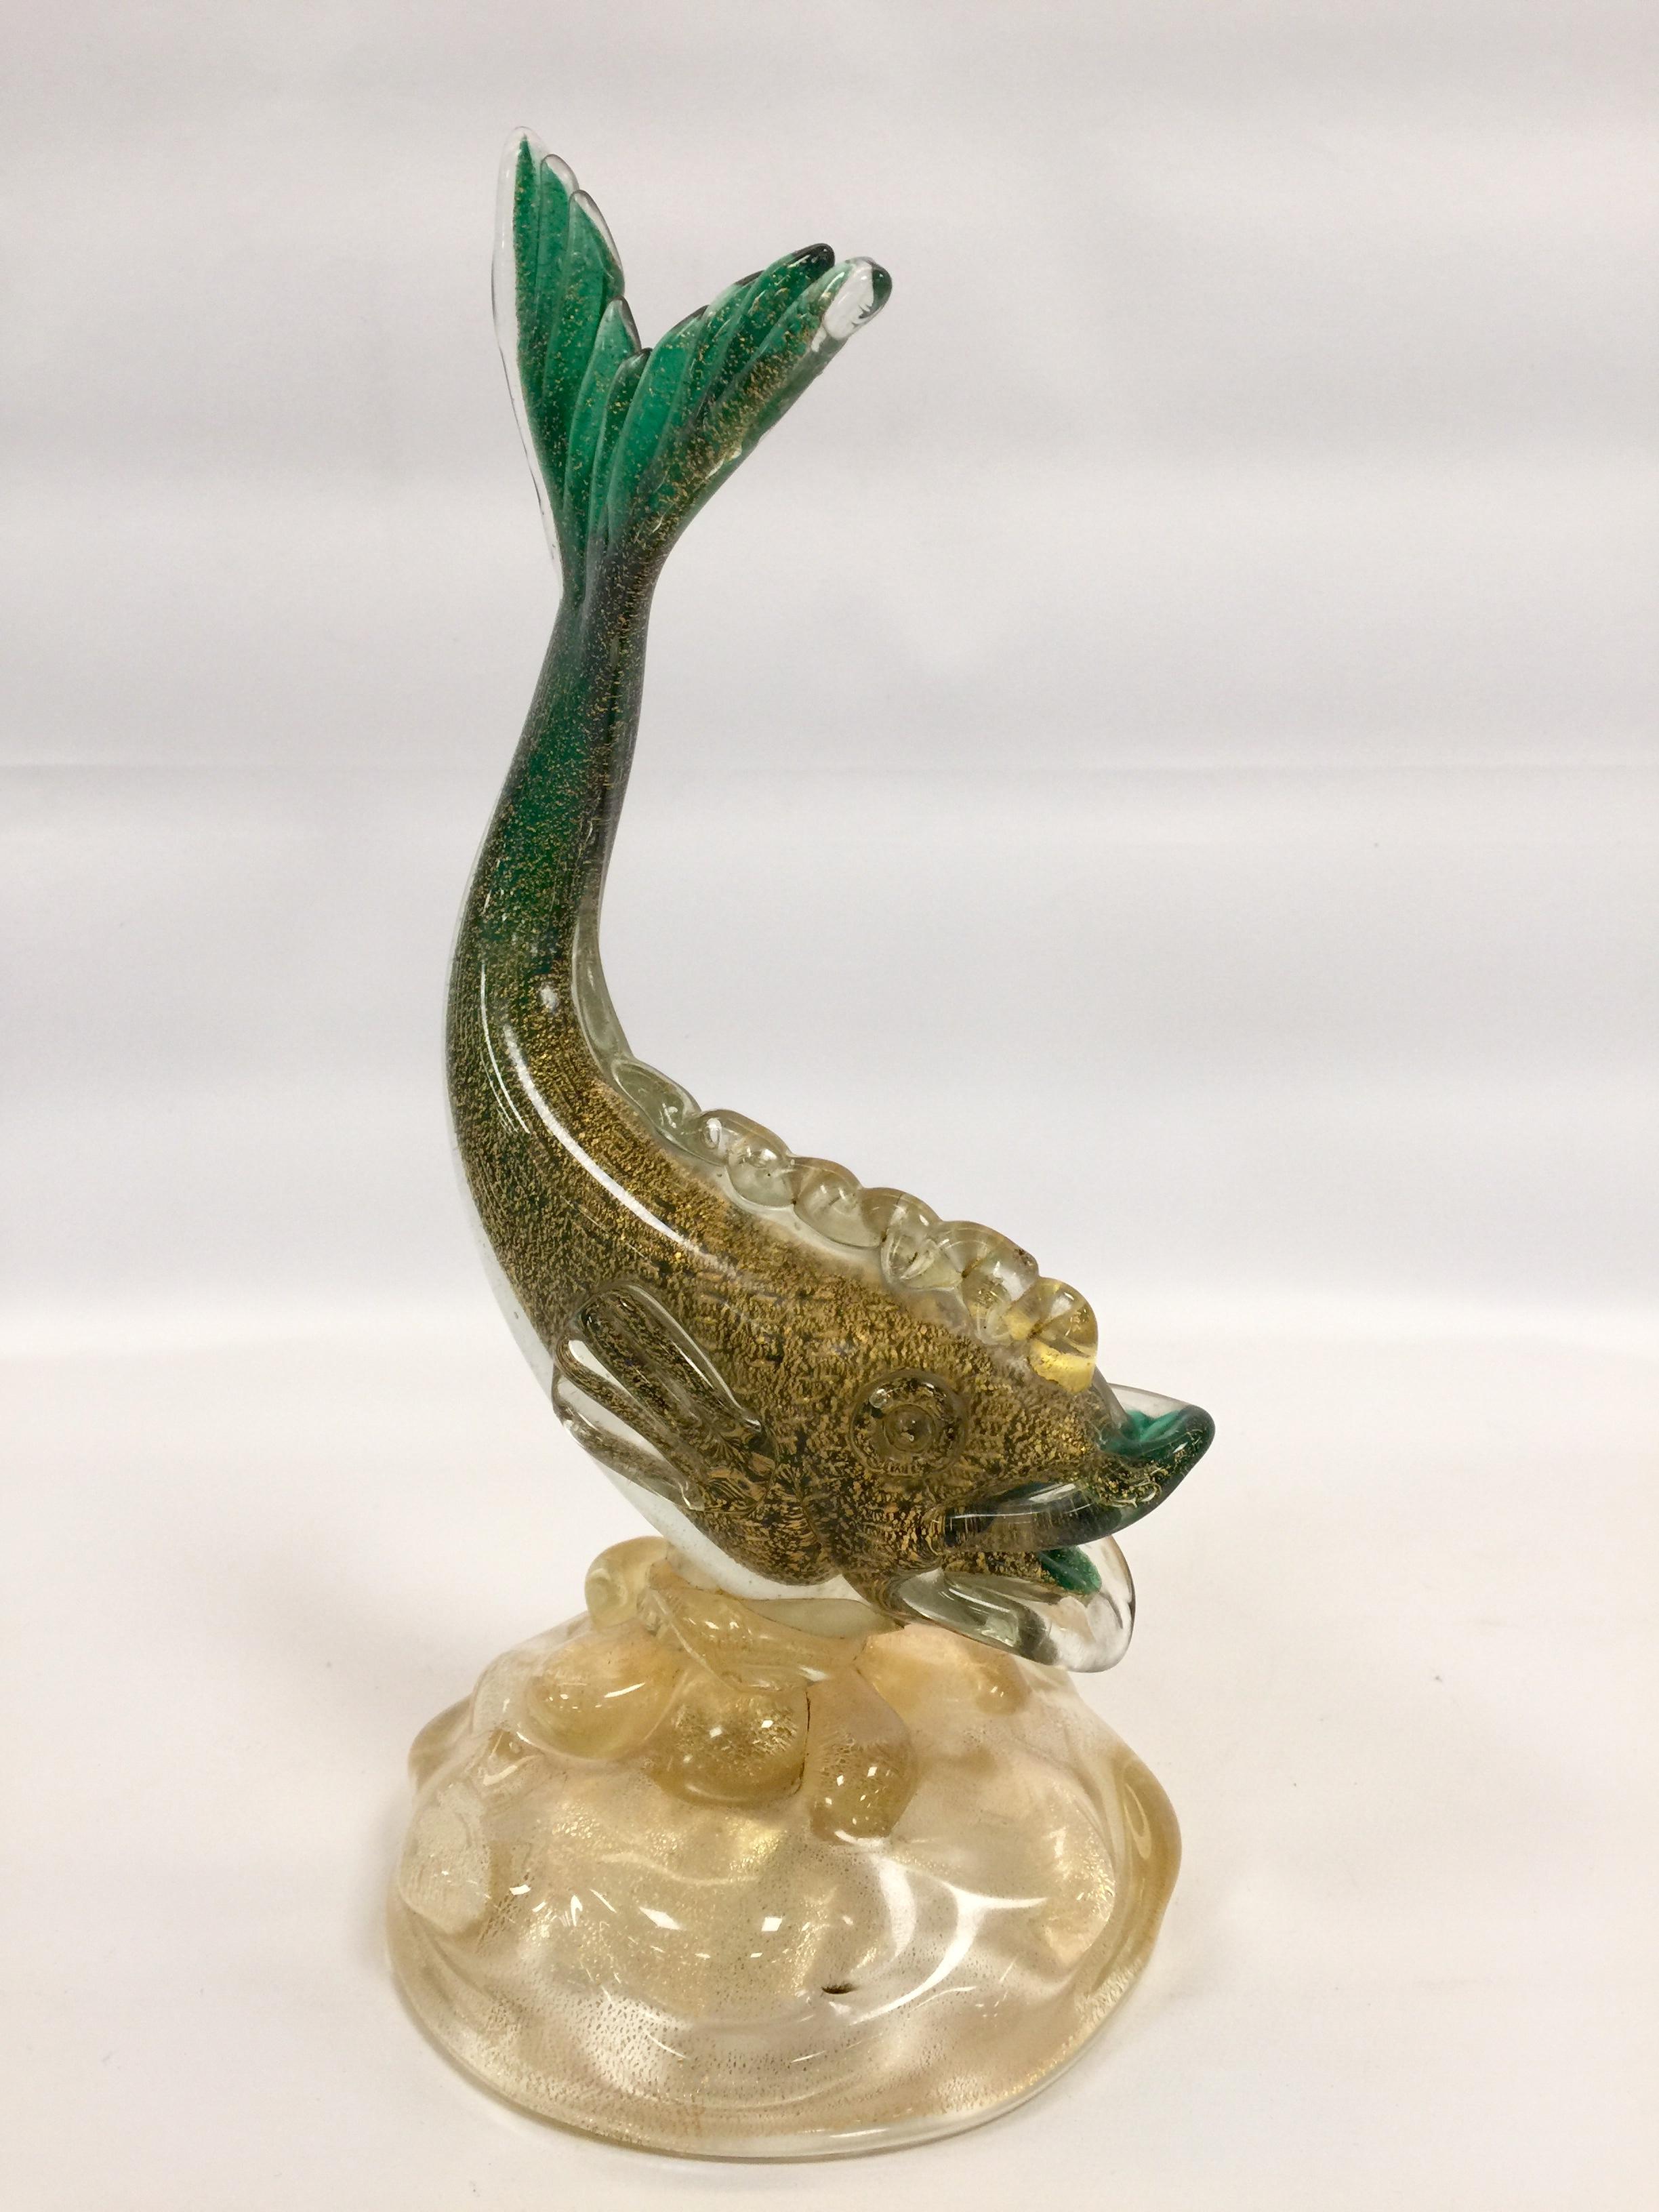 Vintage Ercole Barovier fish in artistic blown glass of Murano green sculpture with applications of air bubbles and gold foil.